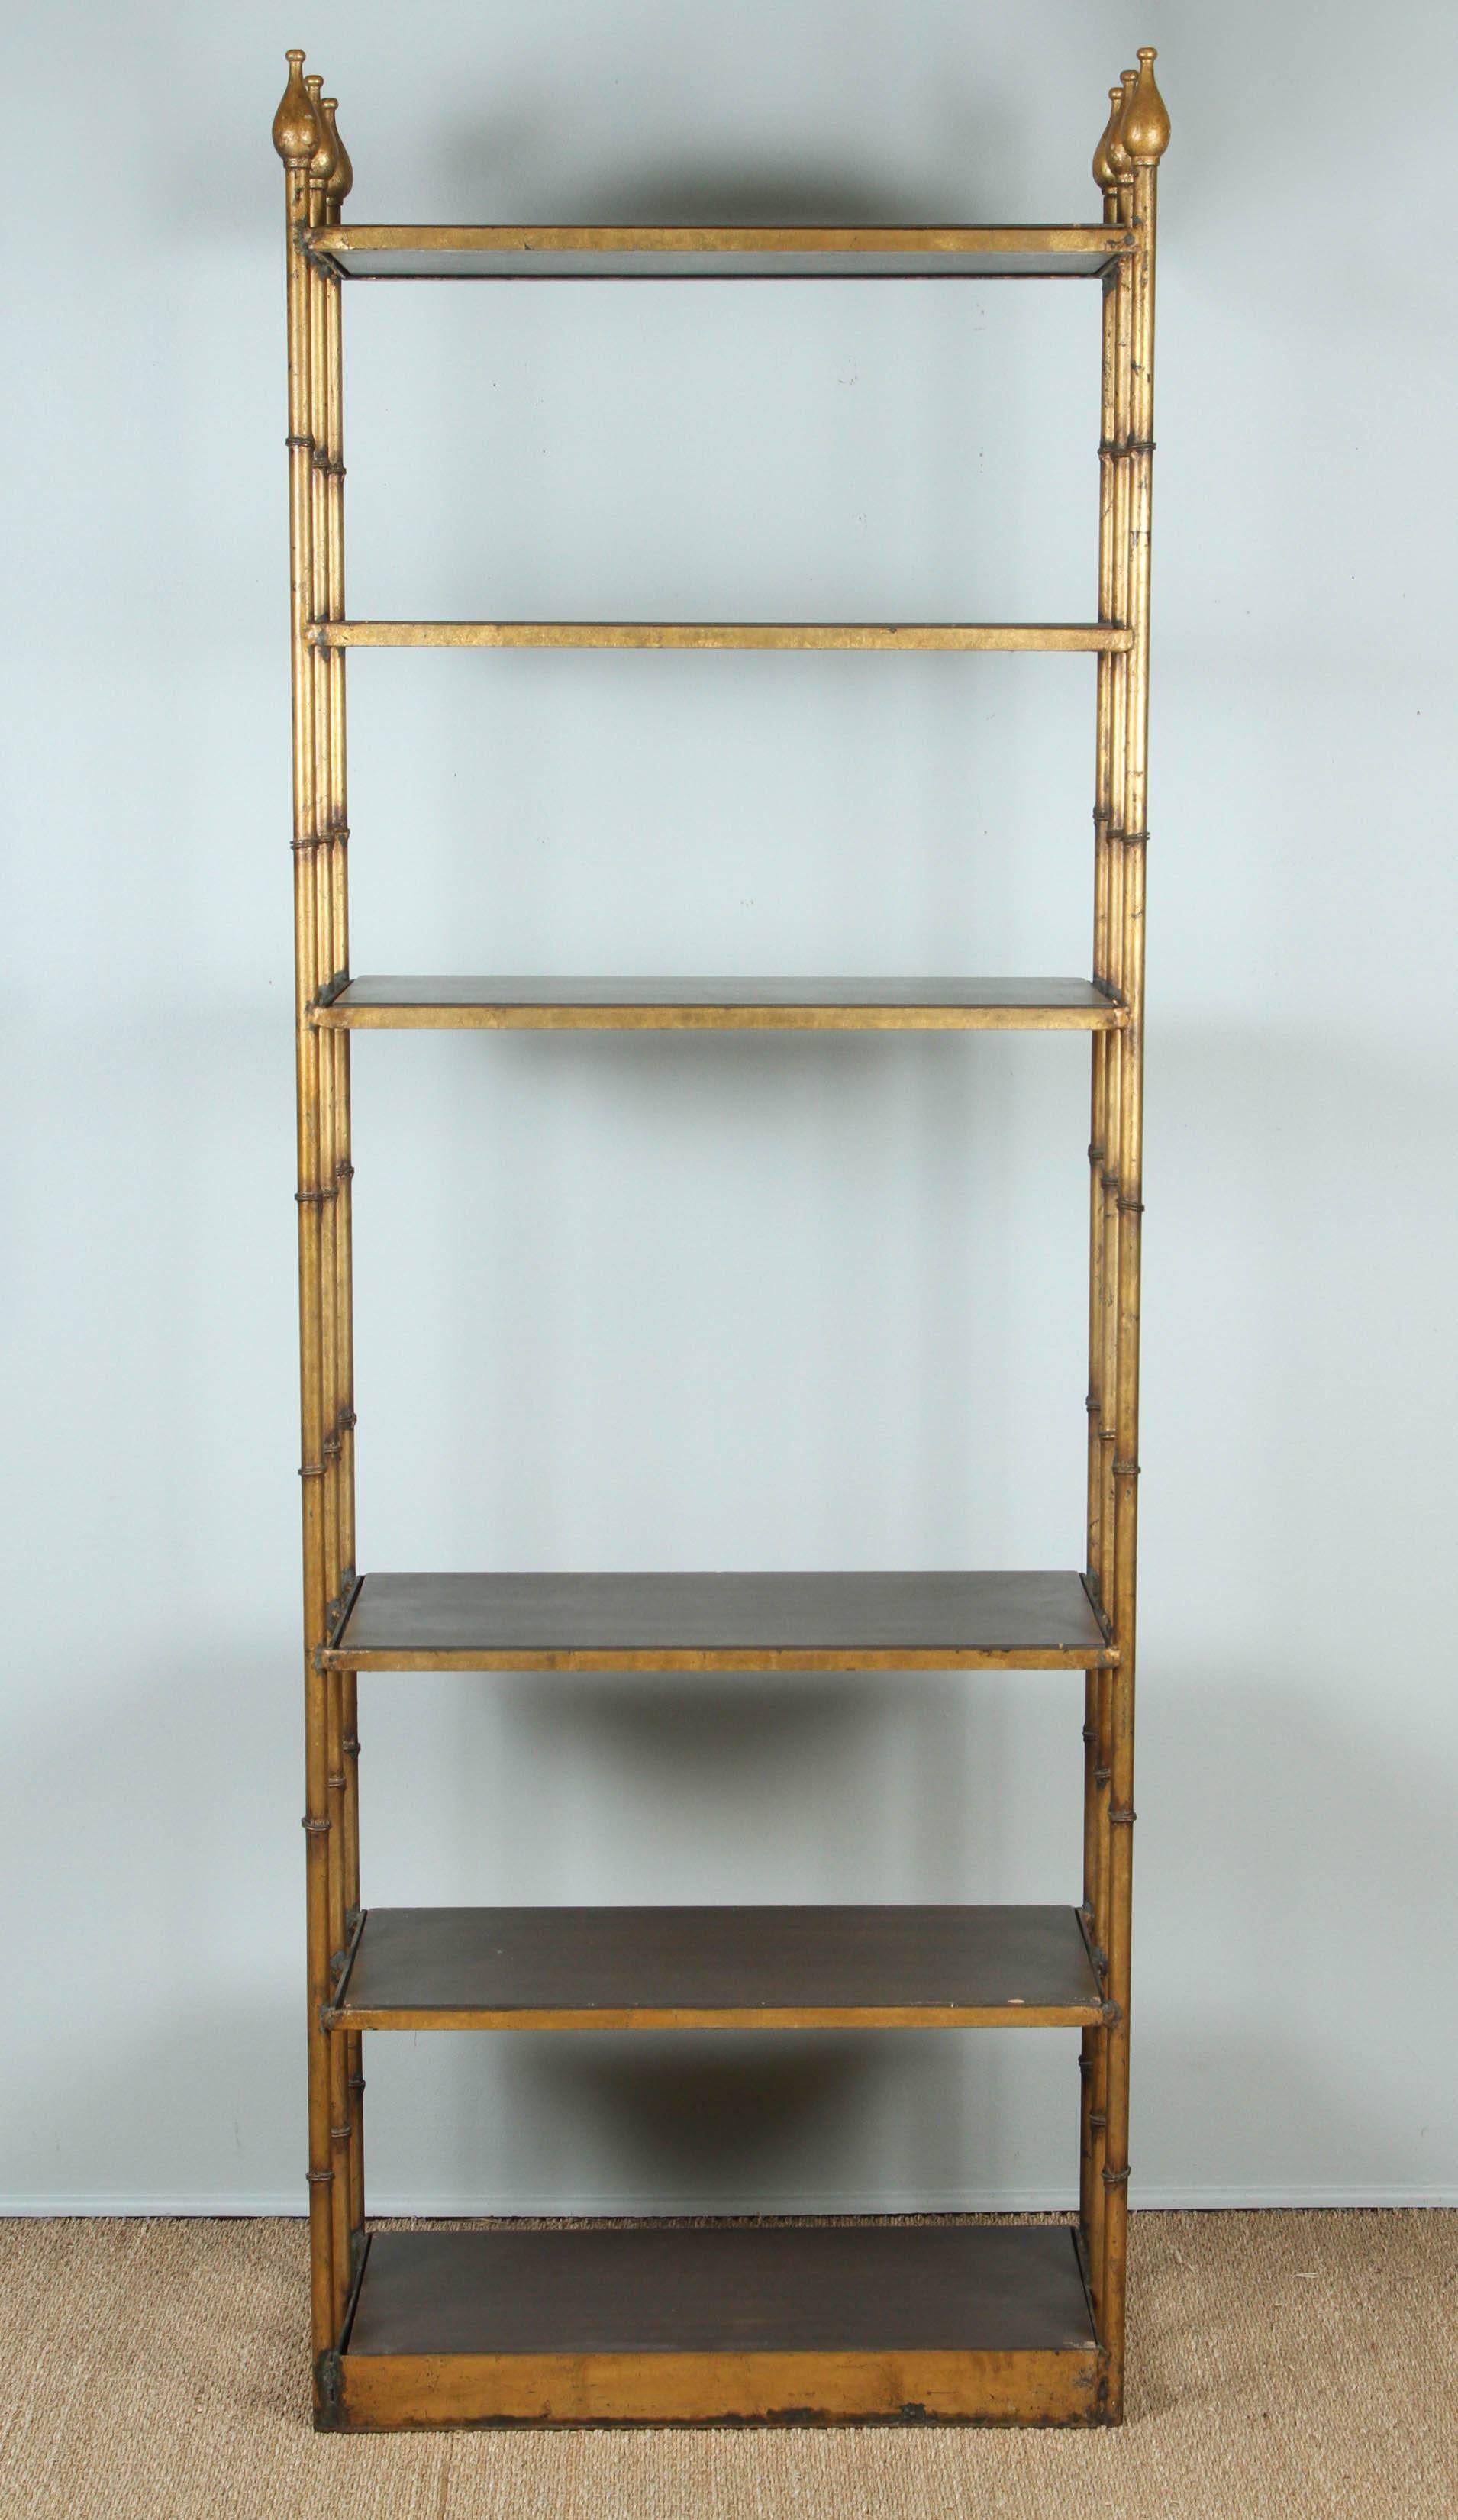 Gilded faux bamboo metal frame with wooden finials and shelves.